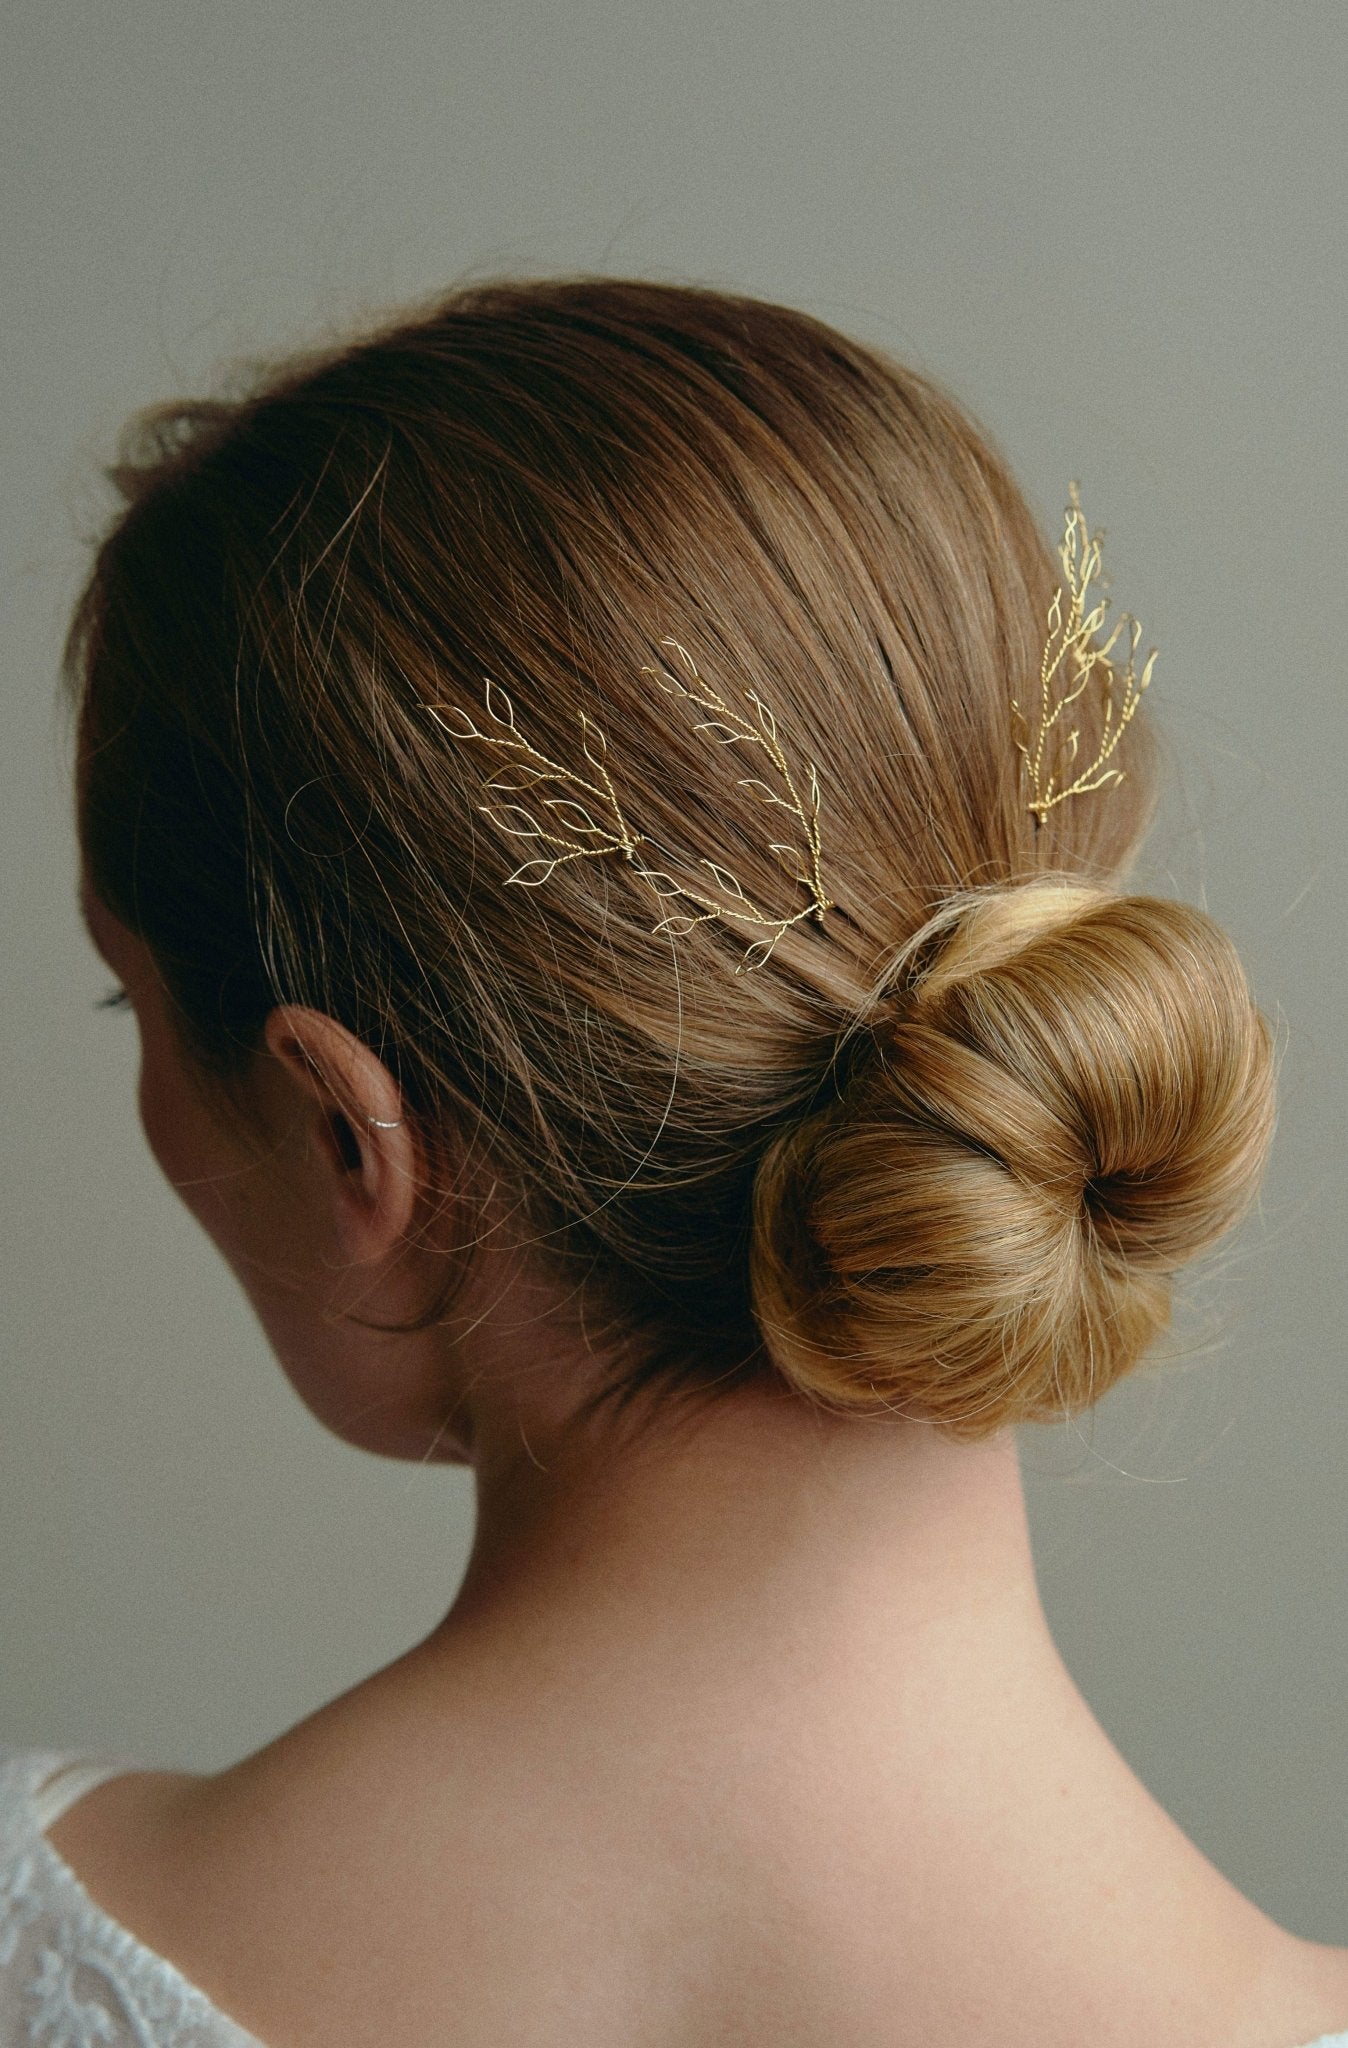 Leafy Wedding Hair Pins - Set of Four  Gold Hairpins worn by model with low bun updo